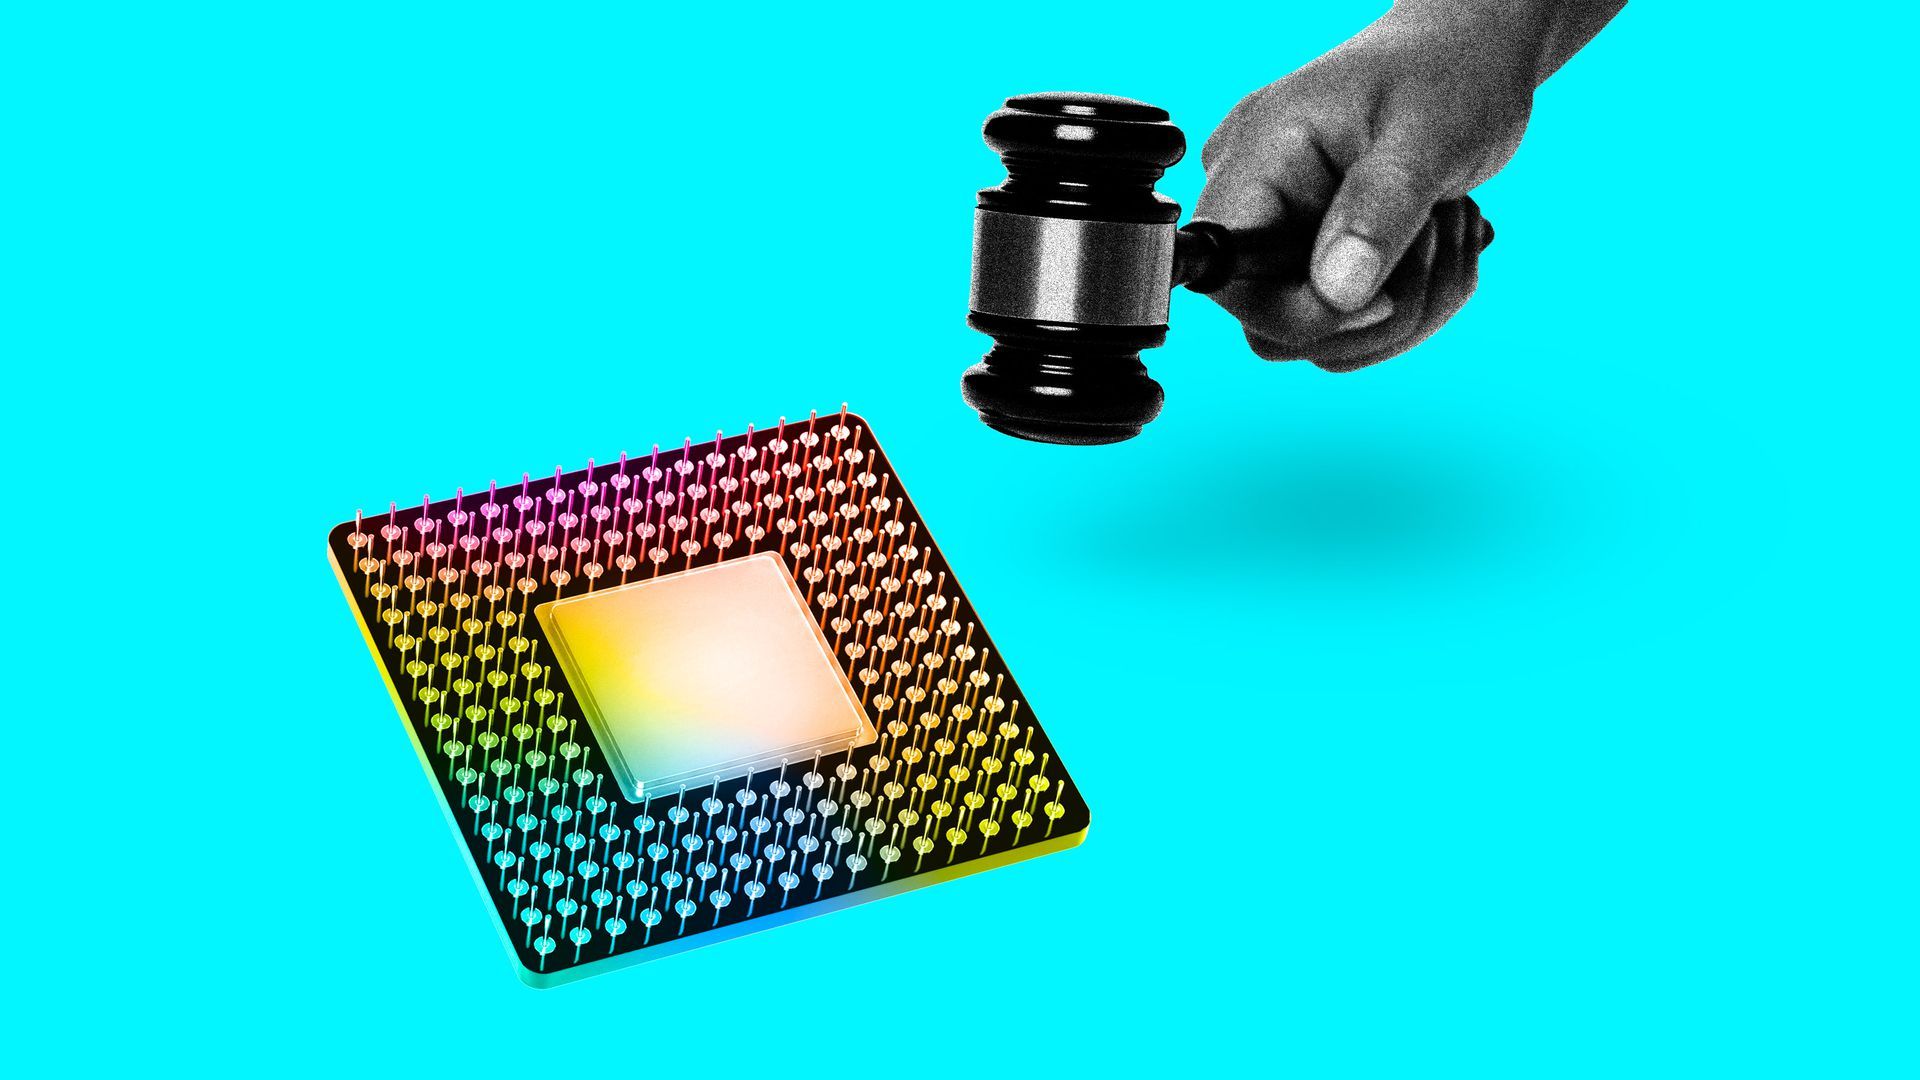 Illustration of a judge's gavel on a computer chip